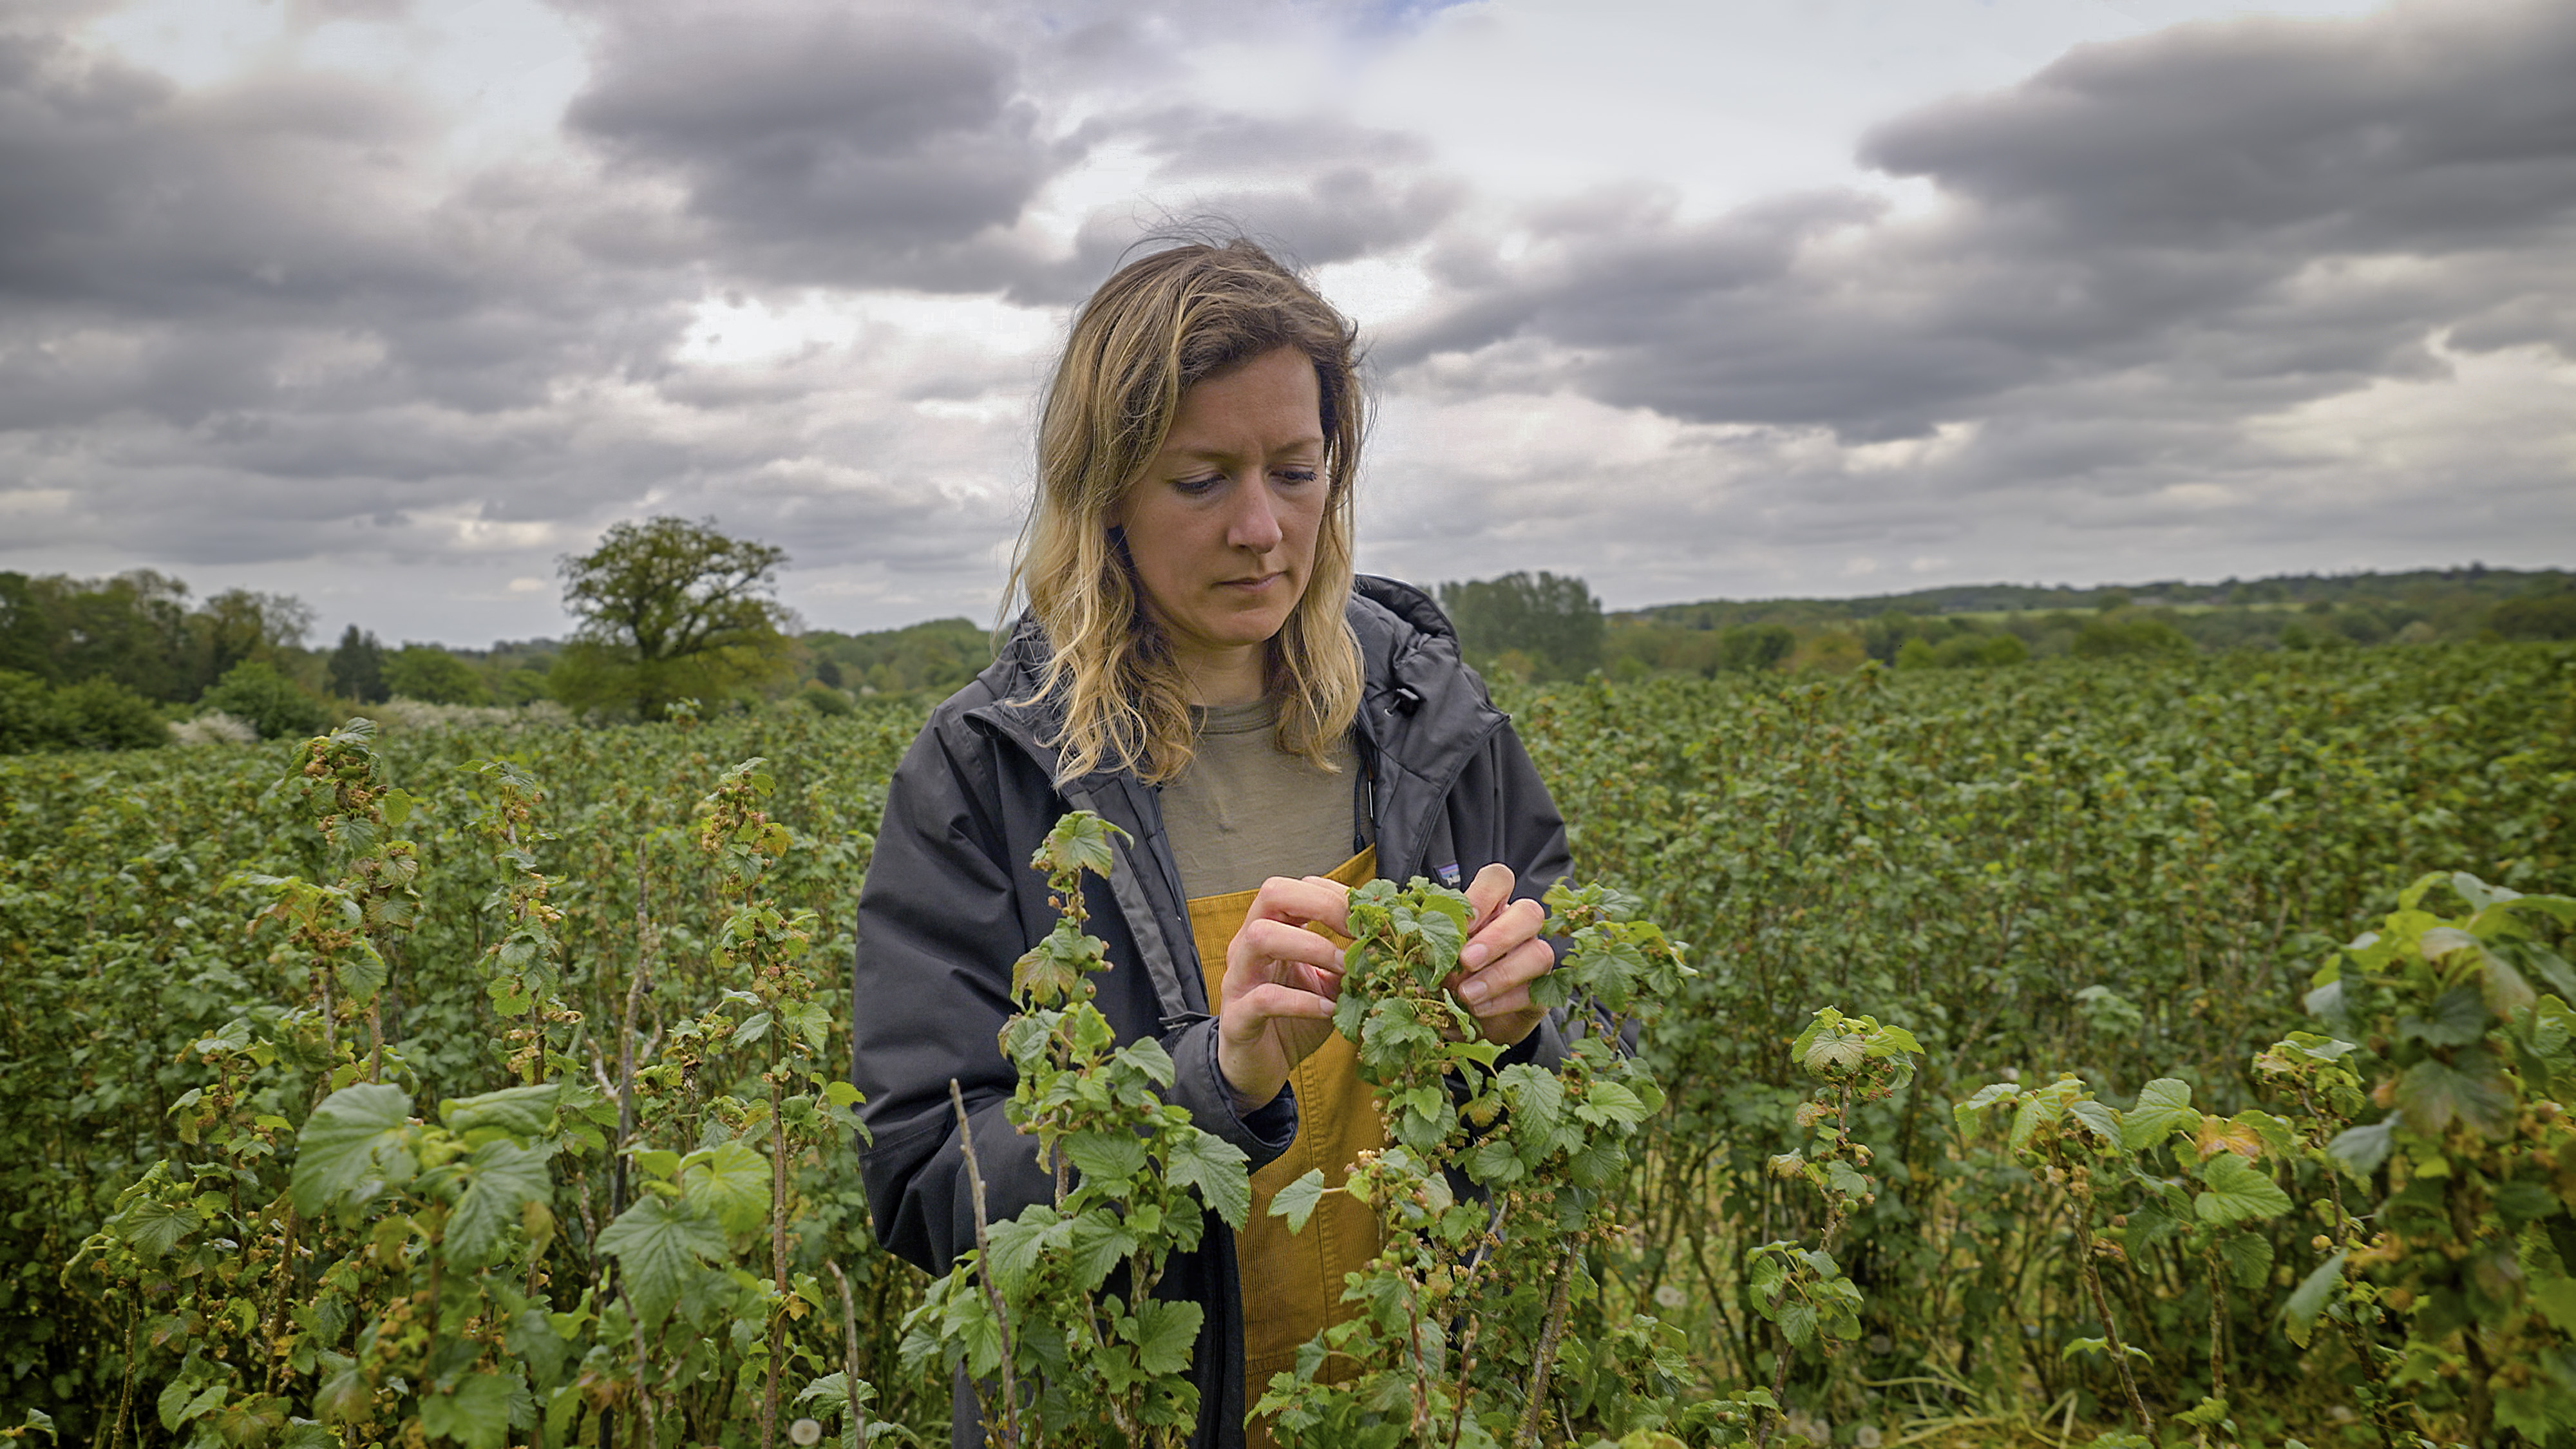 Profile shot of a woman picking blackcurrants in a field.